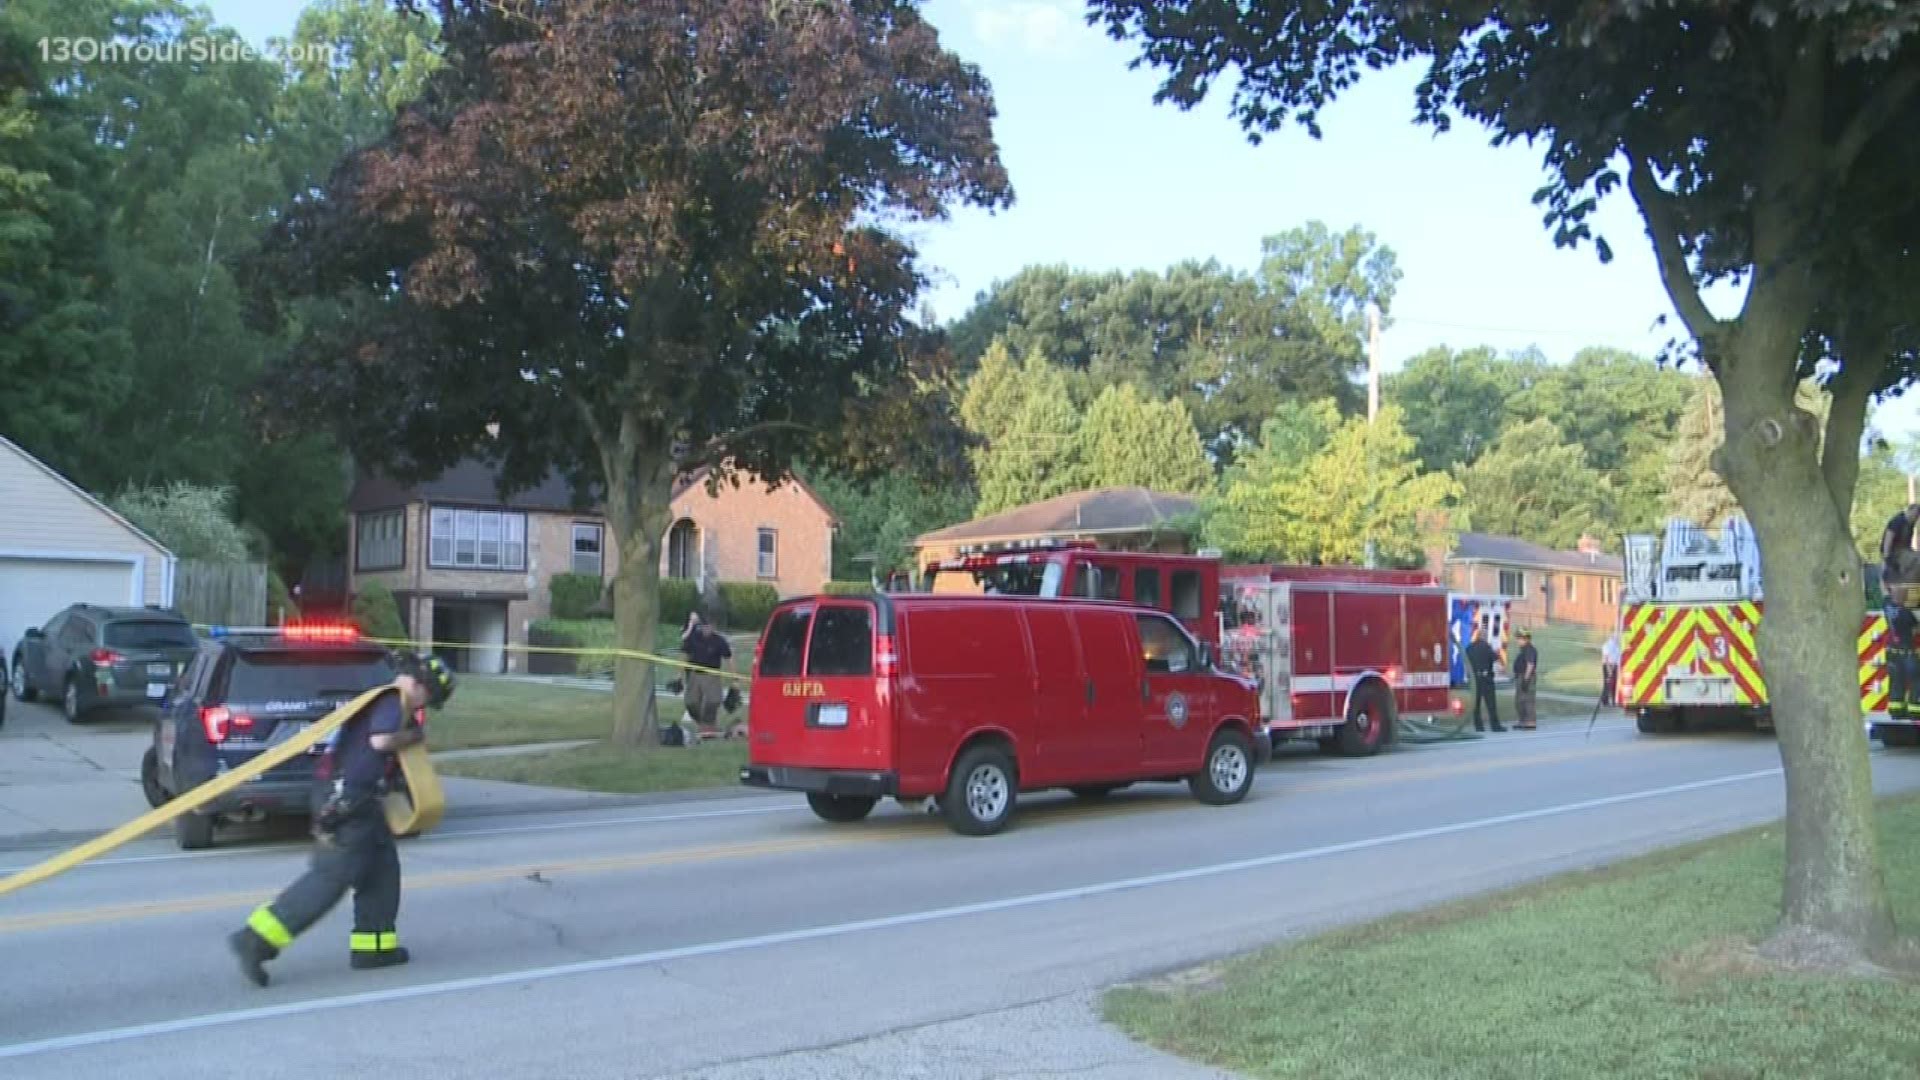 The Grand Rapids Fire Department said Friday the fire is not being considered suspicious, but its cause is still under investigation.